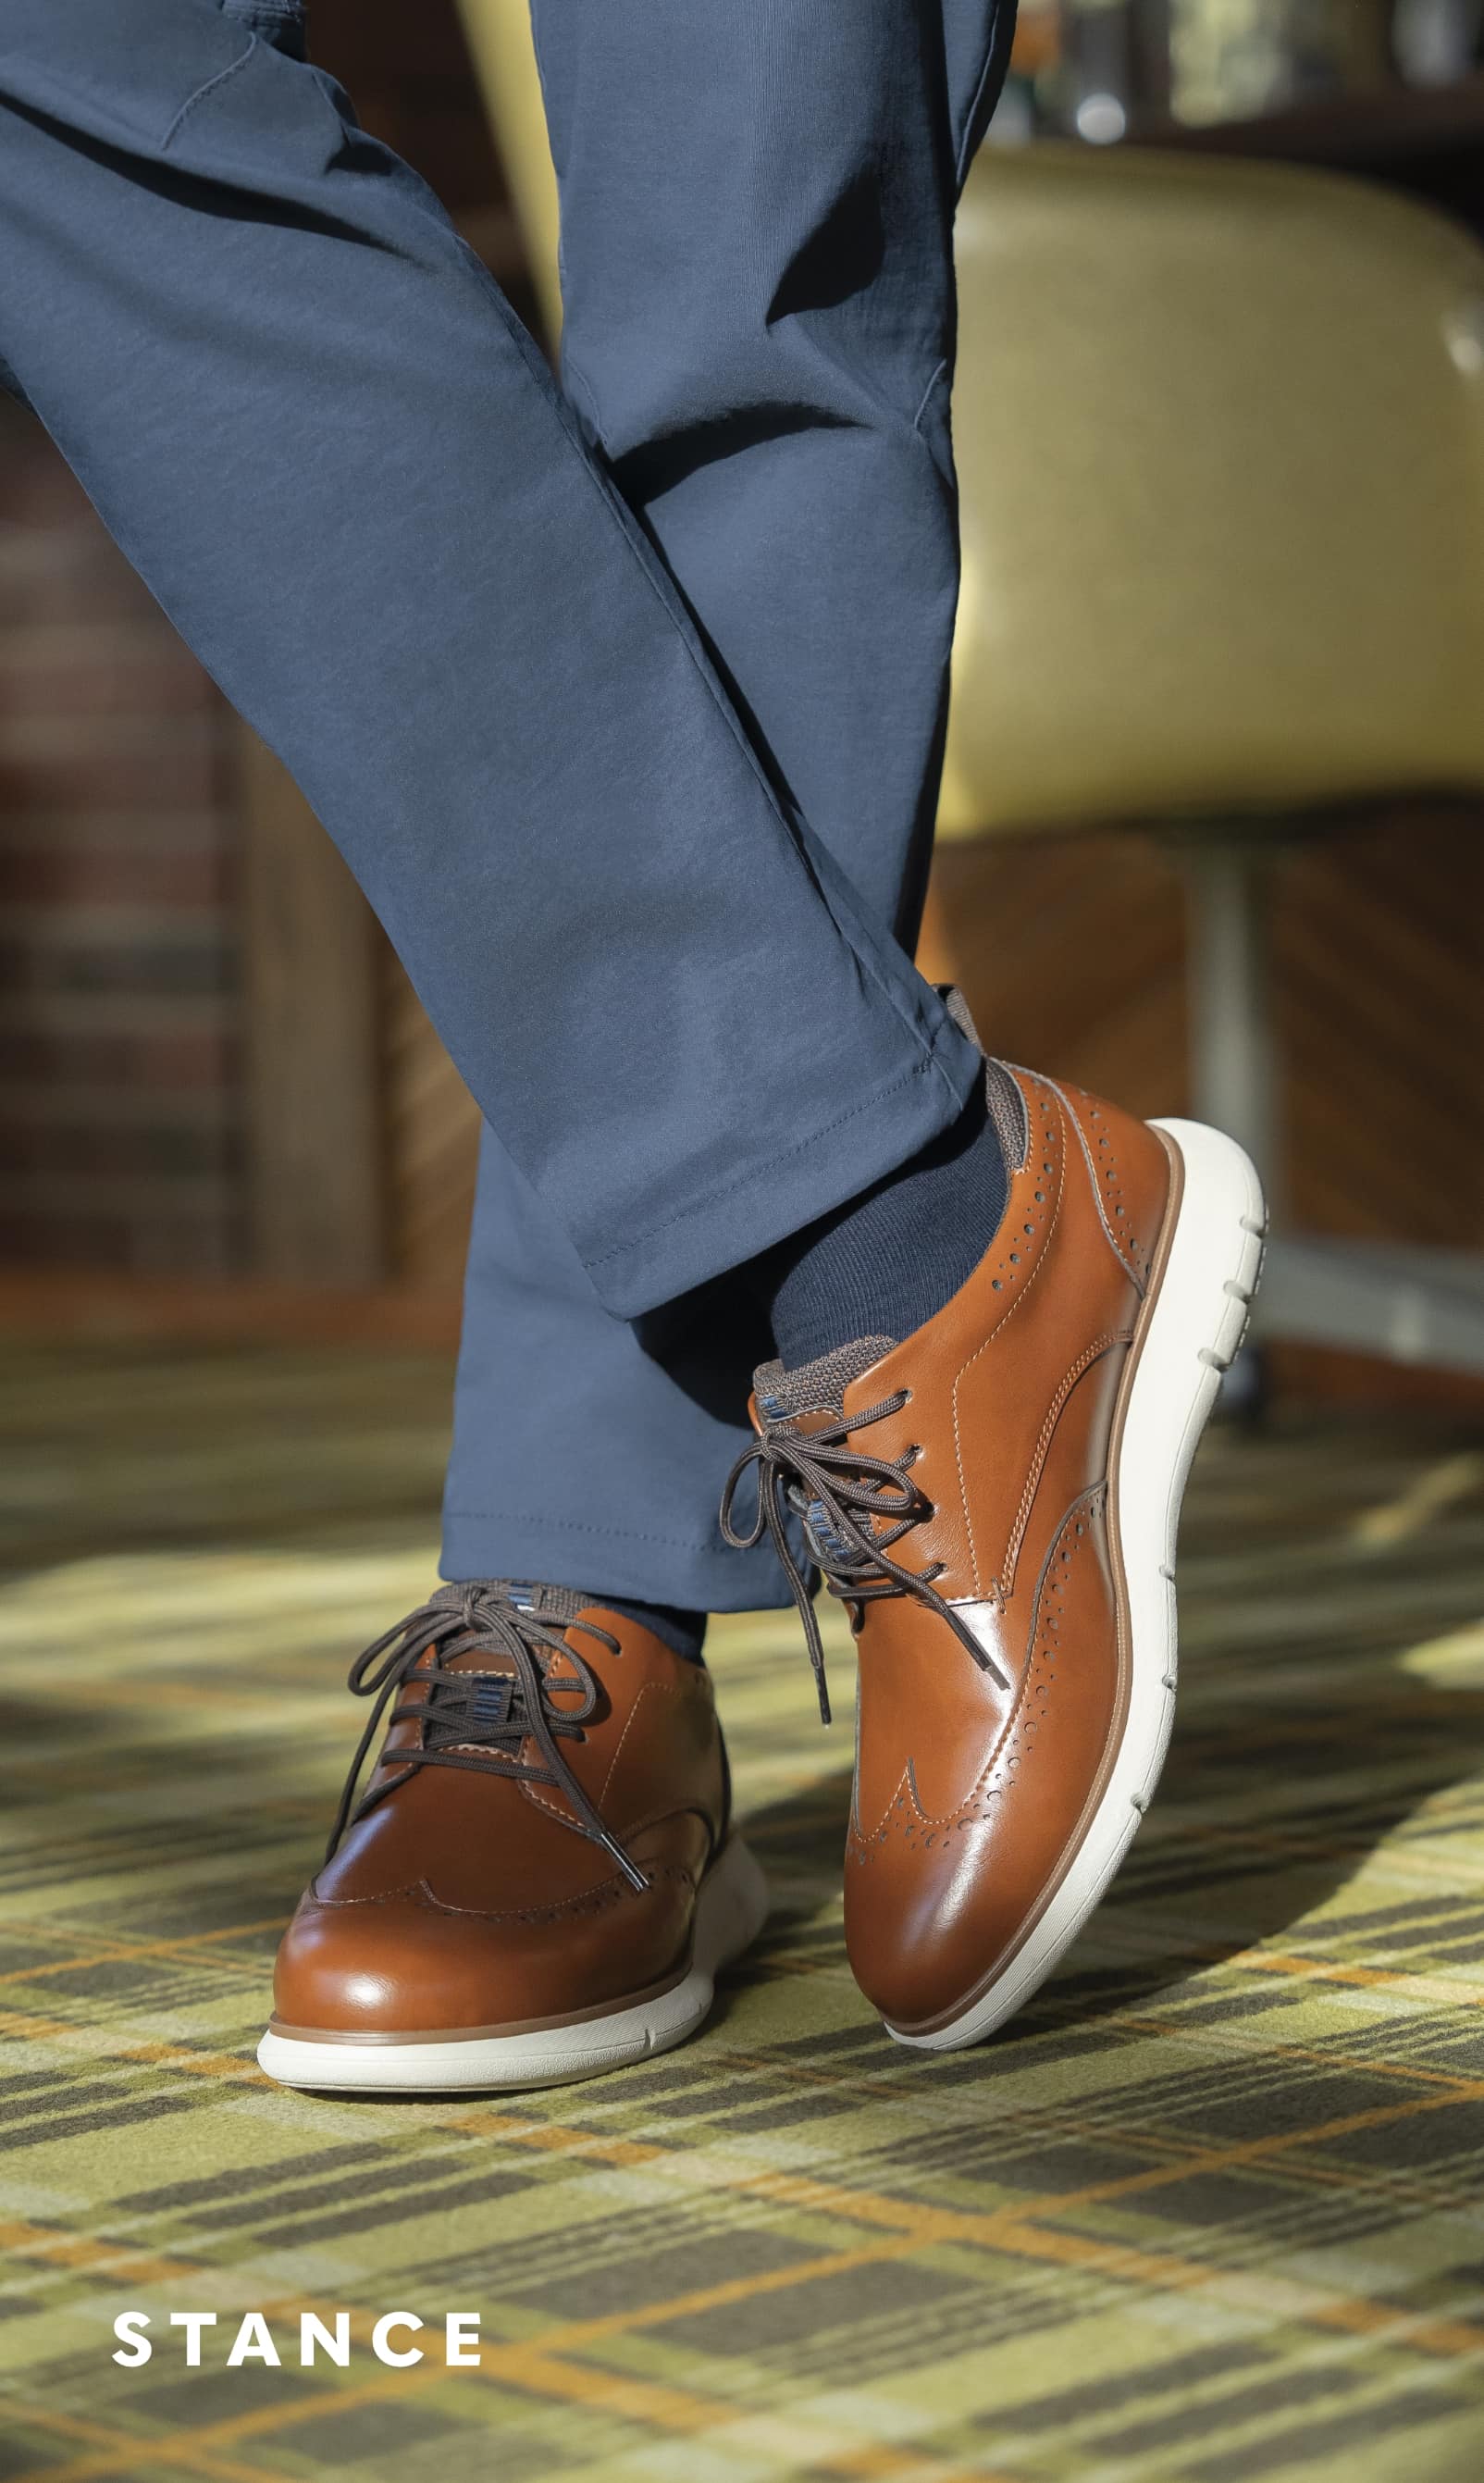 Men's Casual Shoes category. Image features the Stance wingtip in cognac.